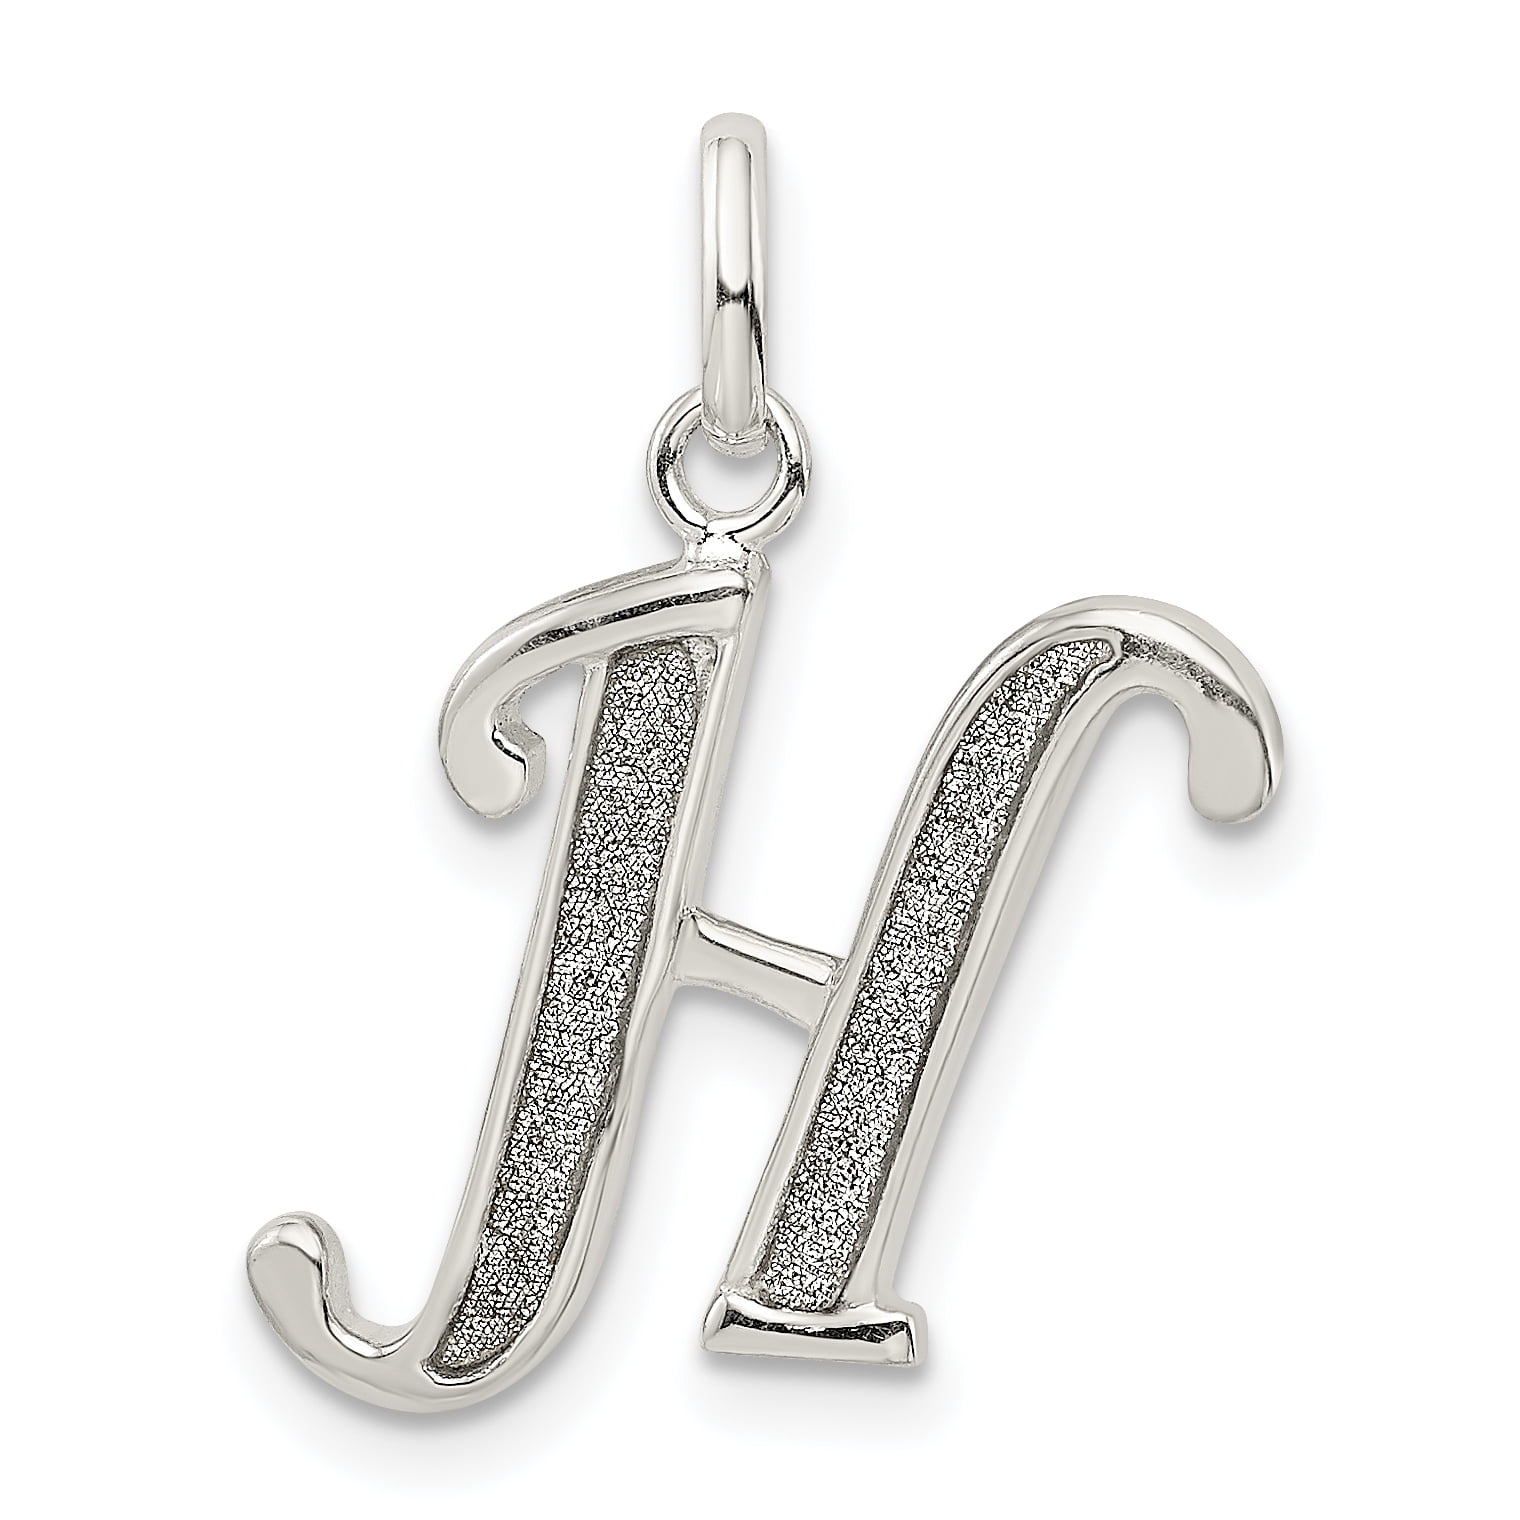 approximately 20 mm x 4 mm Sterling Silver Small Lengthened Polished Number Charm 8 Charm